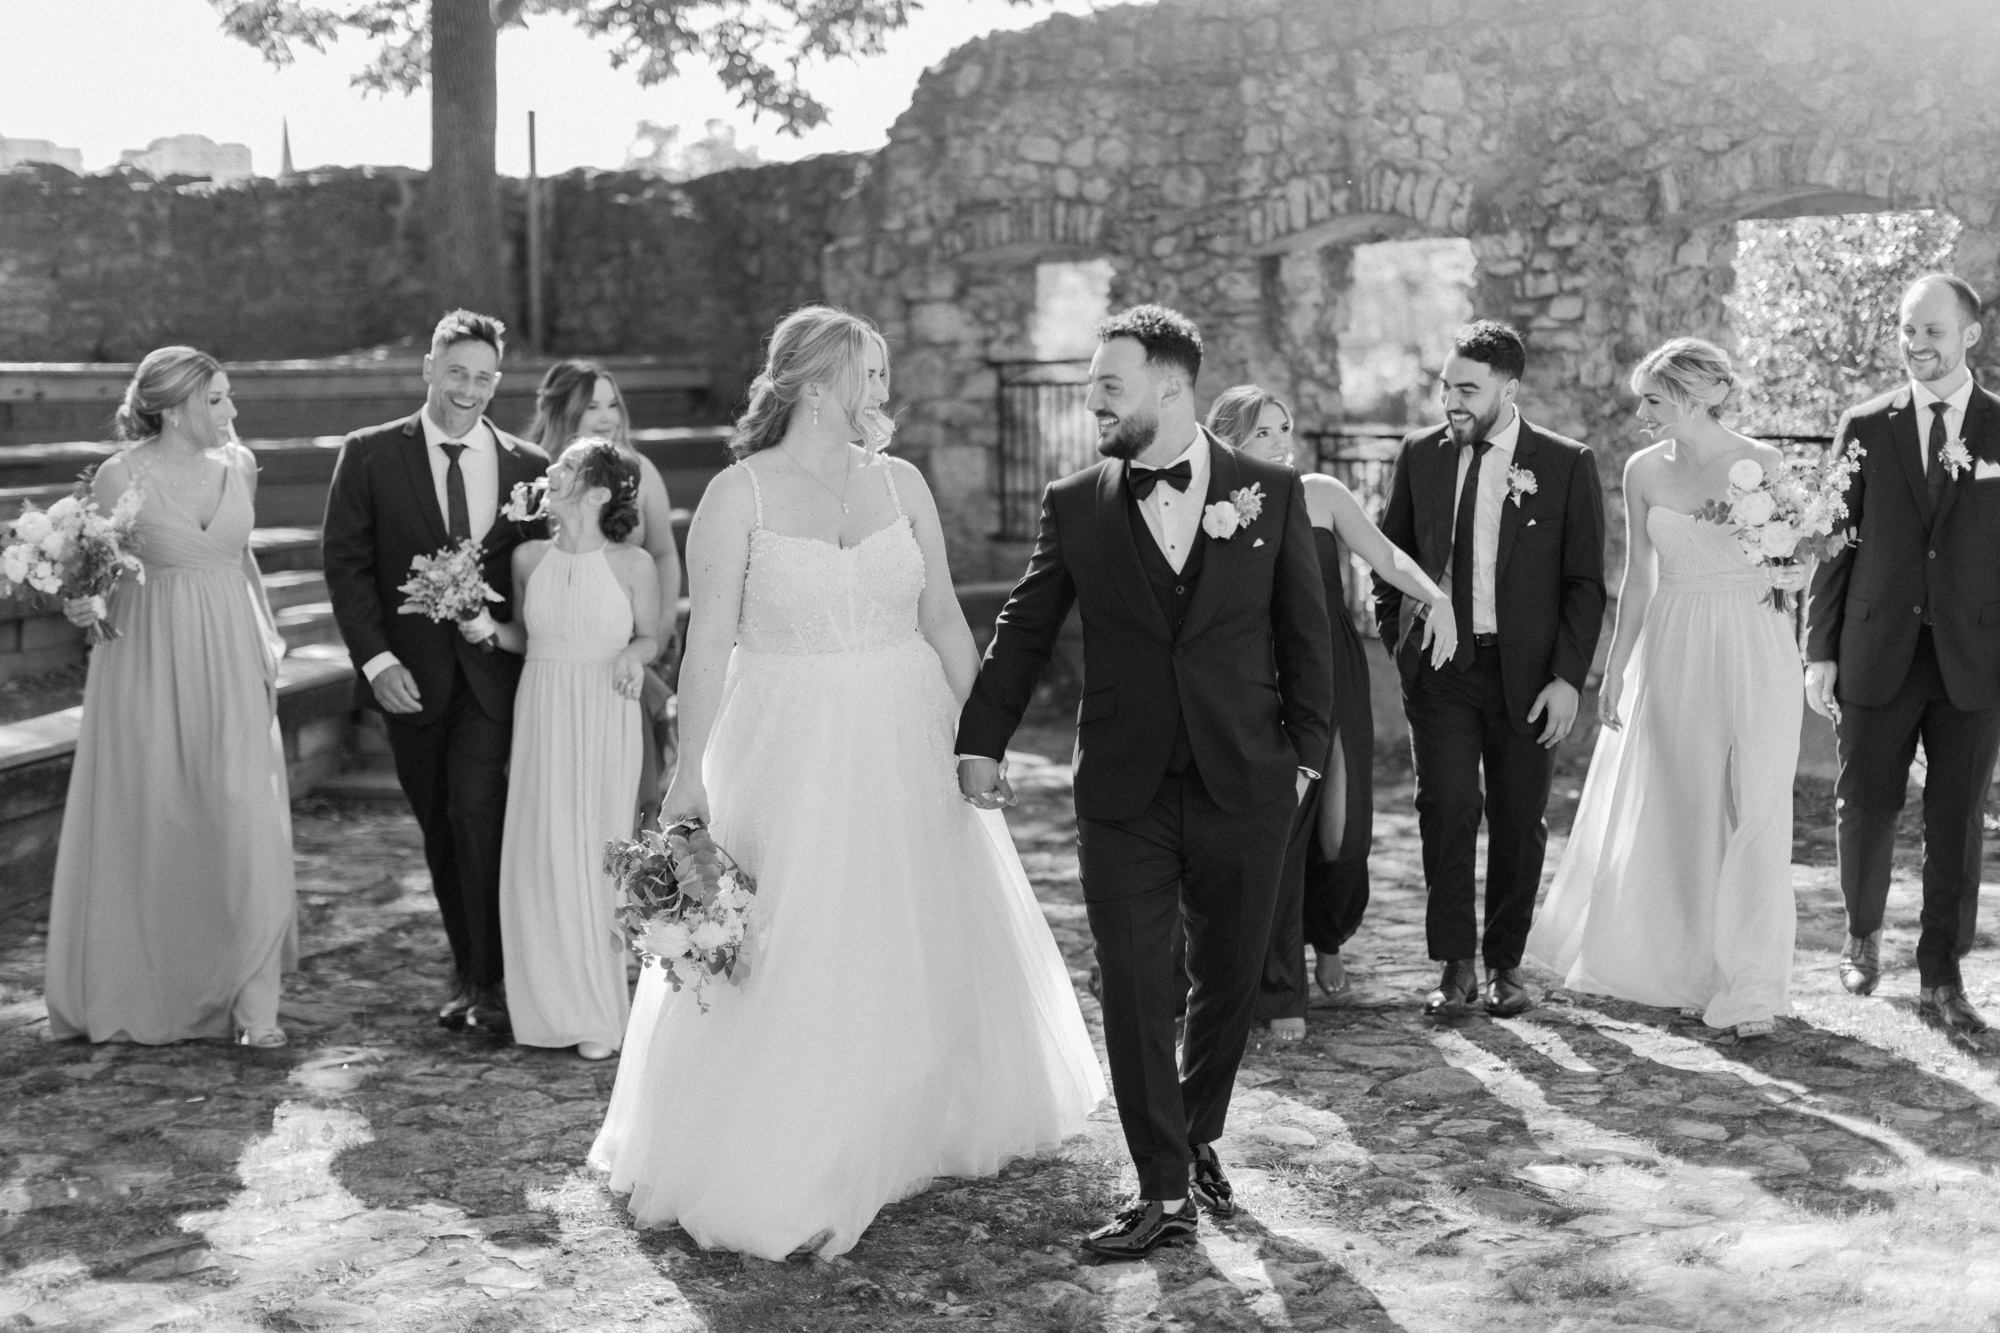 Black and white photo of the bride and groom walking with wedding party at Millrace Park in Cambridge